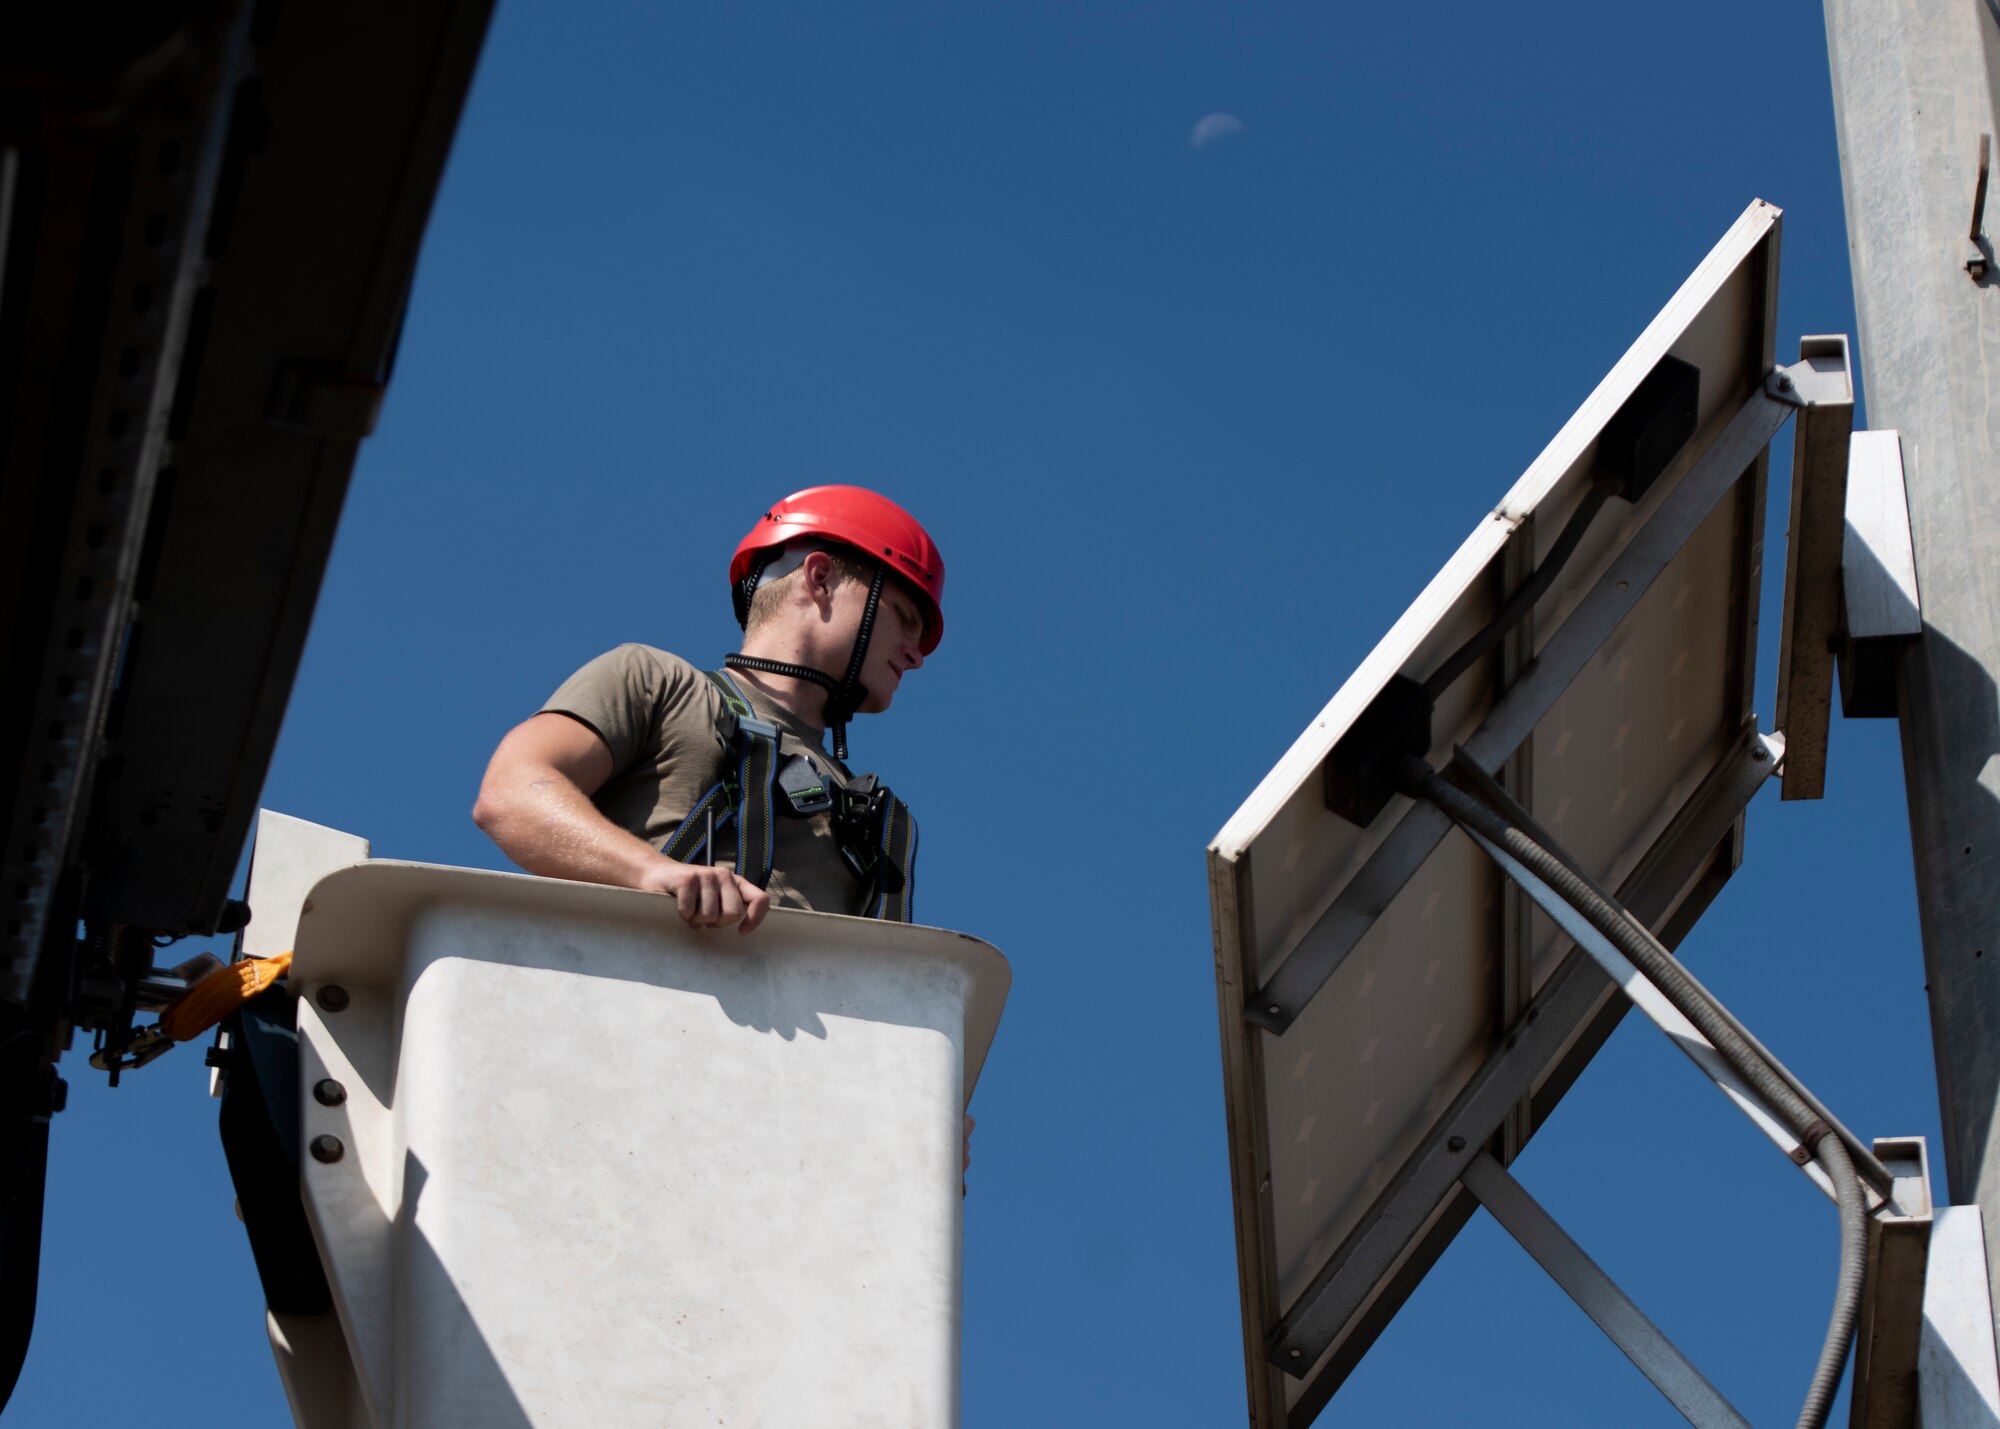 Senior Airman Noah Dray checks on a Big Voice loud speaker tower from a bucket lift as Incirlik Air Base, August 12, 2020.